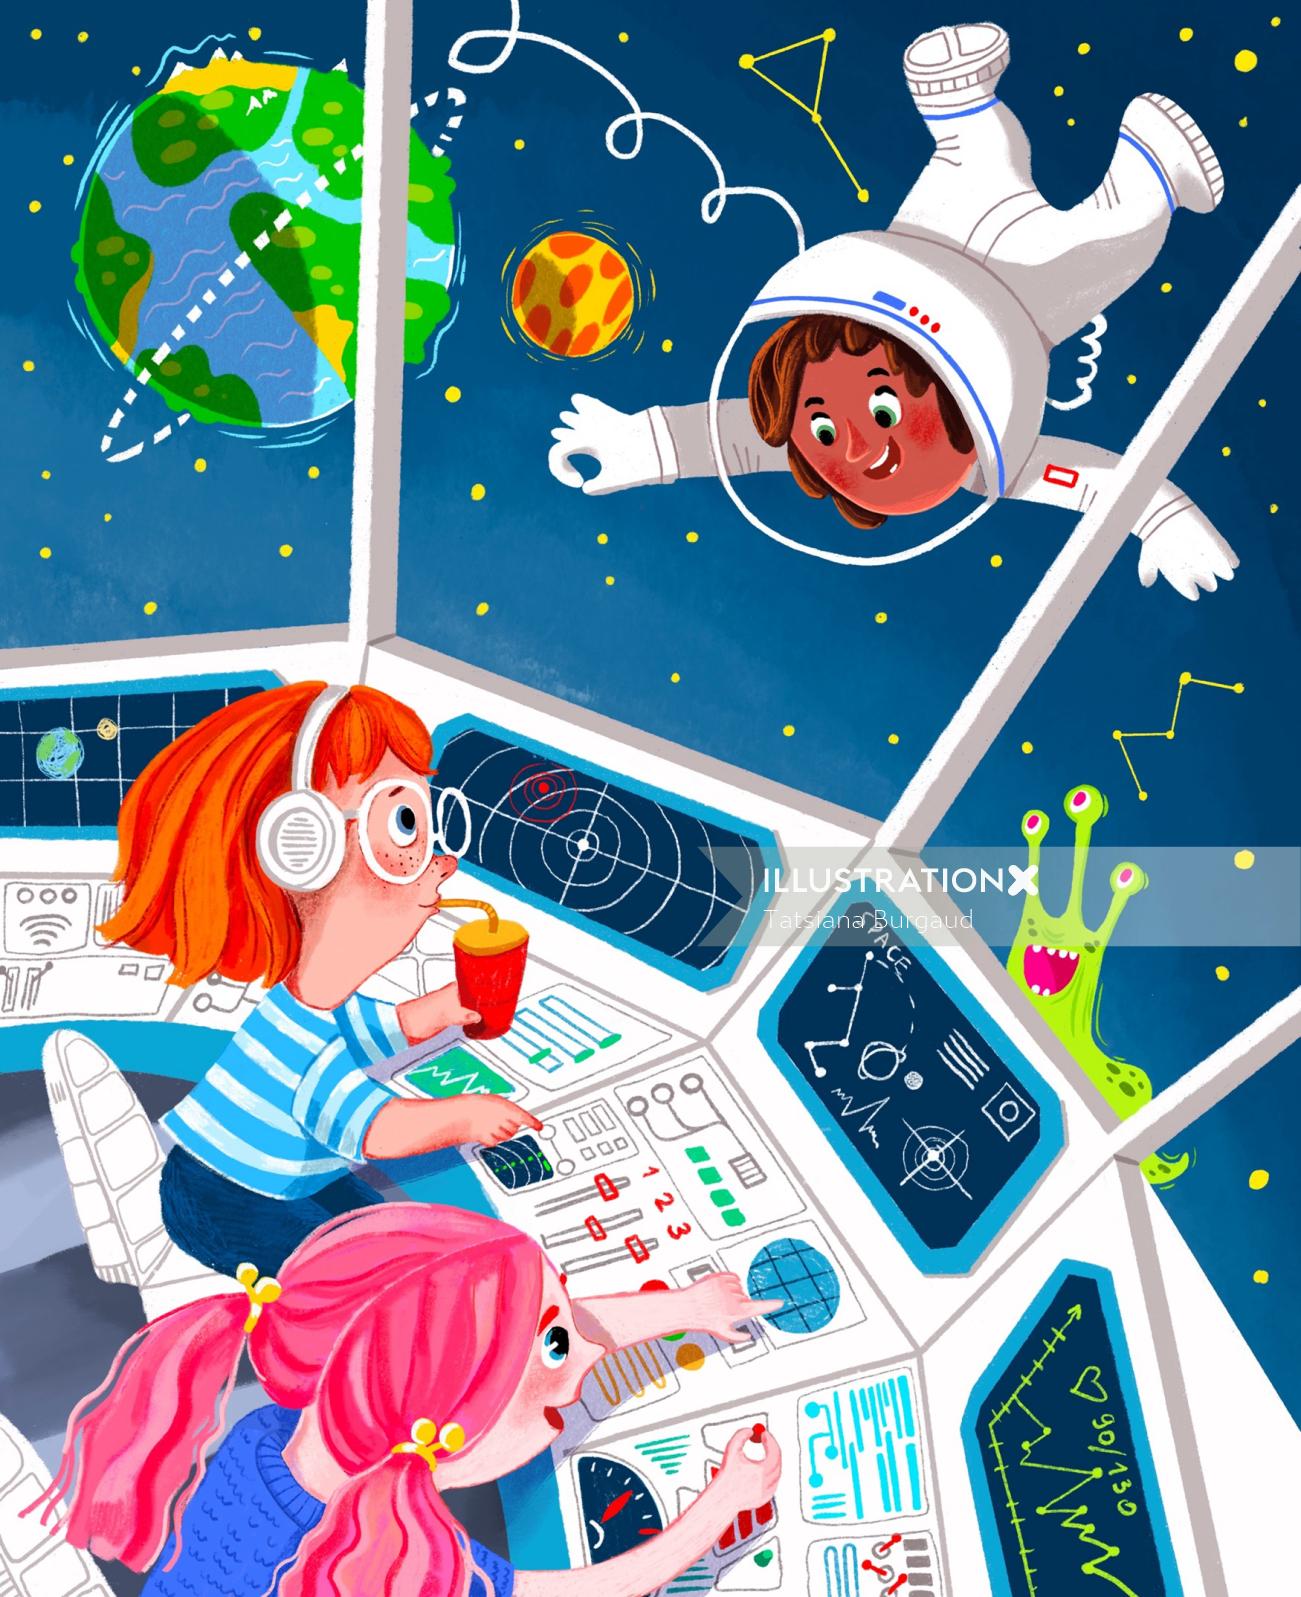 Spaceship, navigate, extraterrestrial, children, astronautics, earth, stars, electronic devices